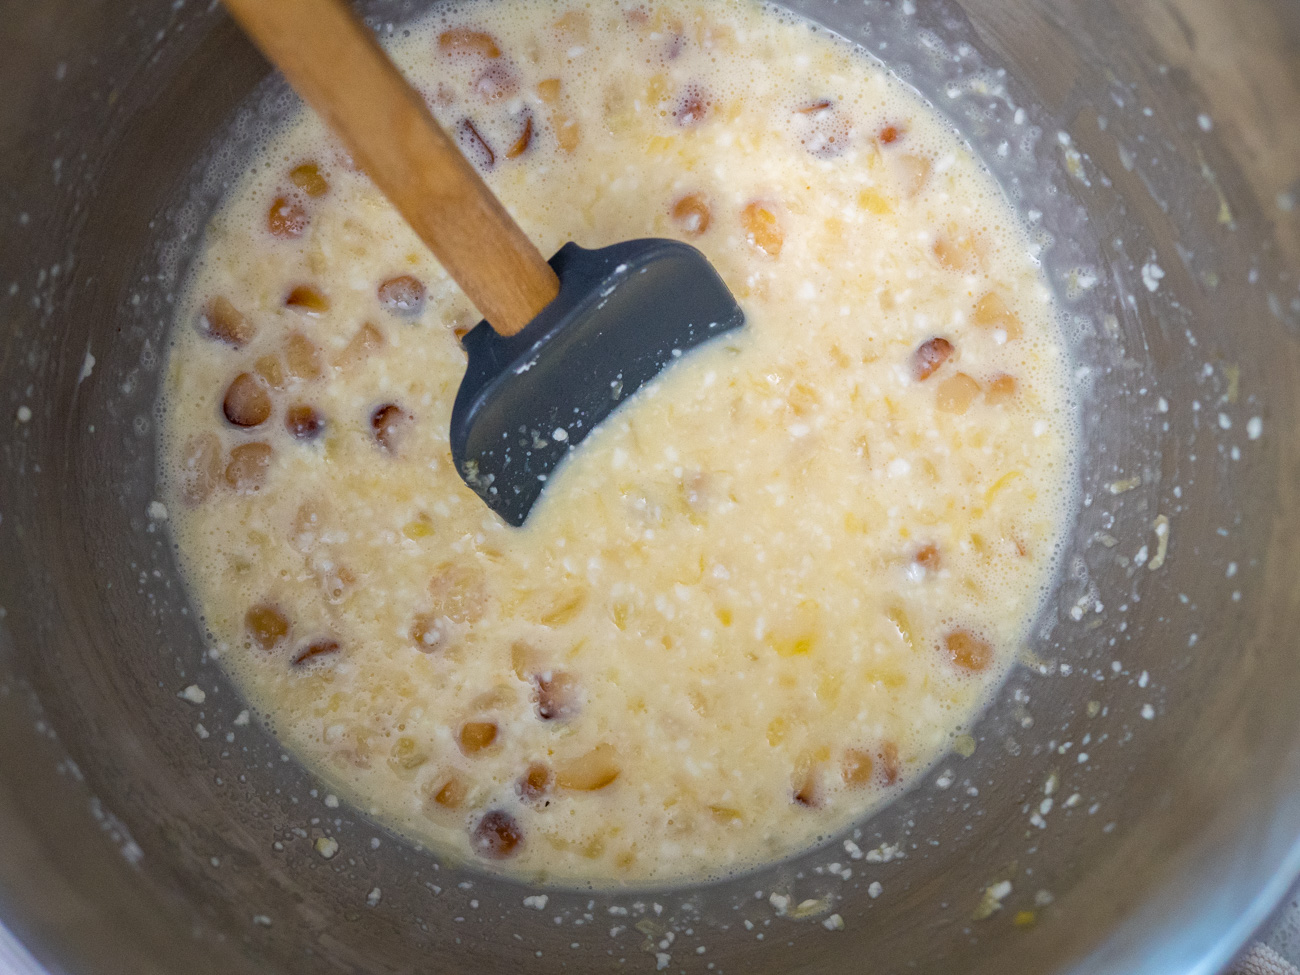 While the crust is baking, beat together eggs and powdered sugar in a large bowl. Add cream cheese, granulated sugar, crushed pineapple, and vanilla extract, and mix thoroughly. Fold in white chocolate chips and chopped macadamia nuts.